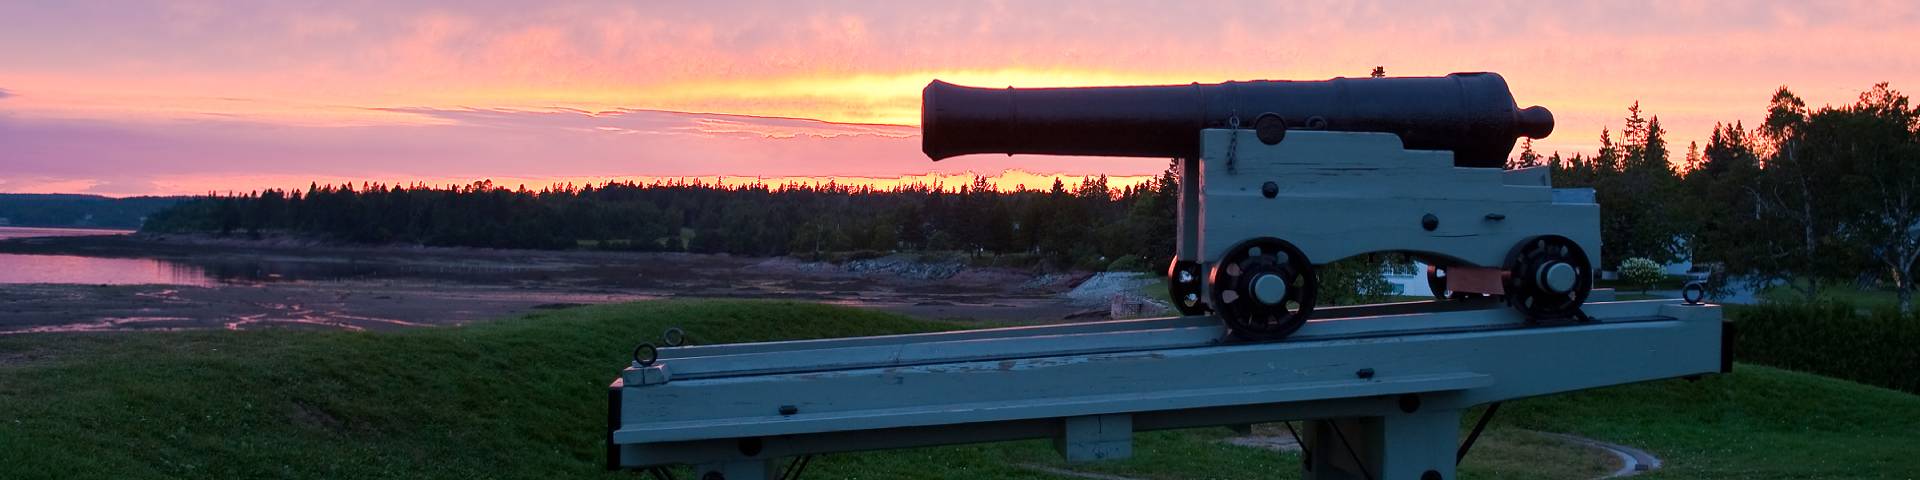 A cannon in front of a sunset